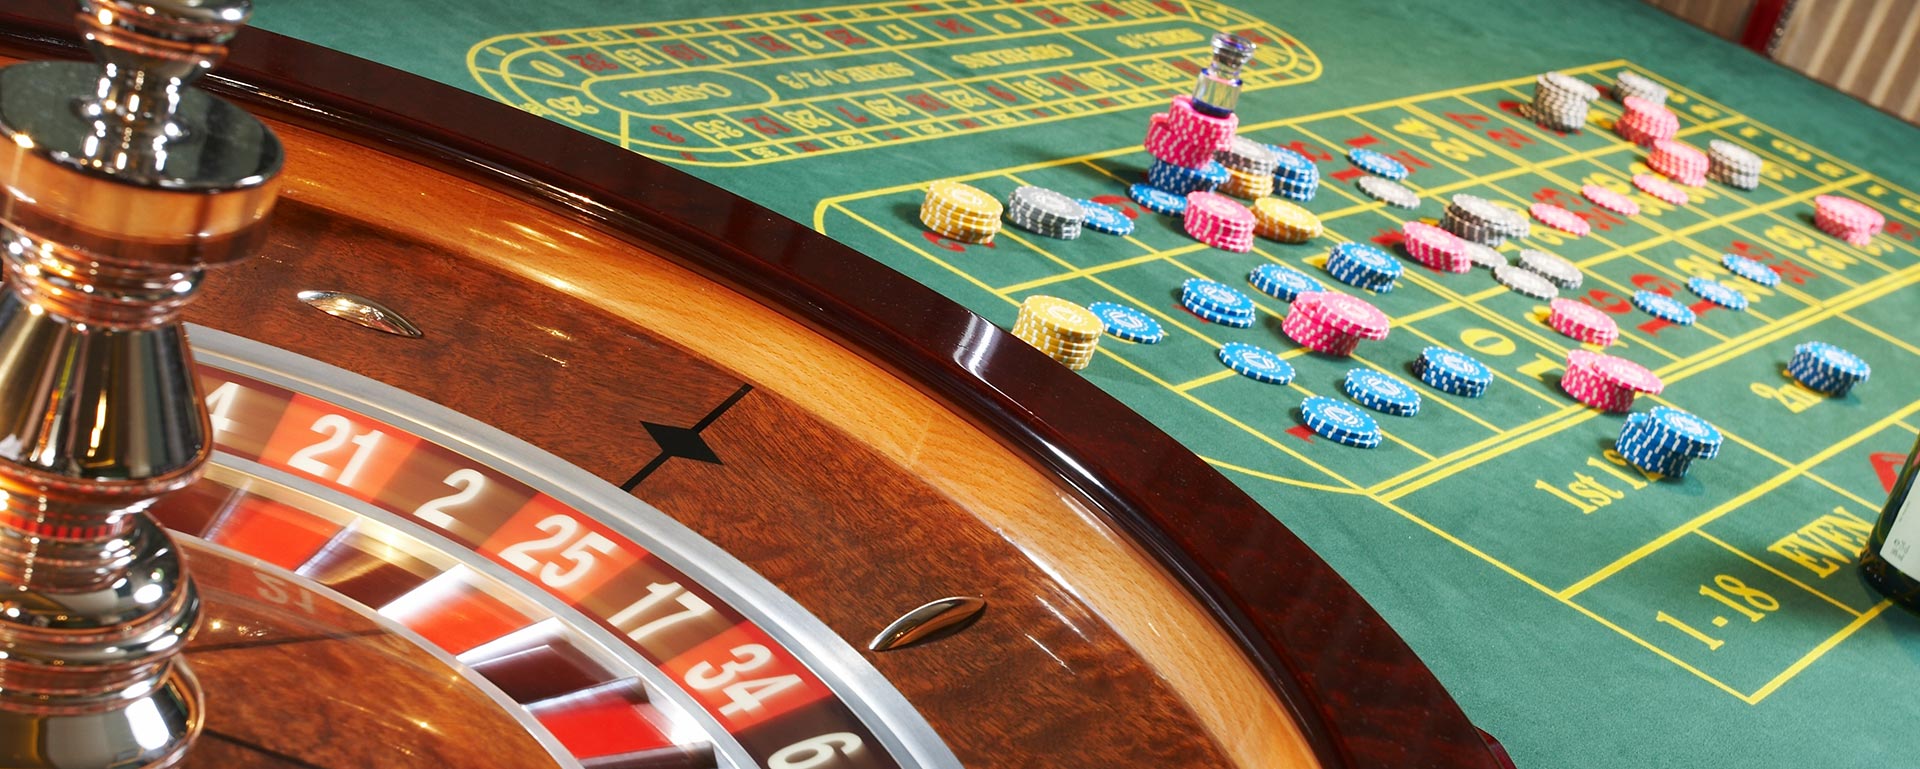 Roulette Bets - All Betting Options Explained